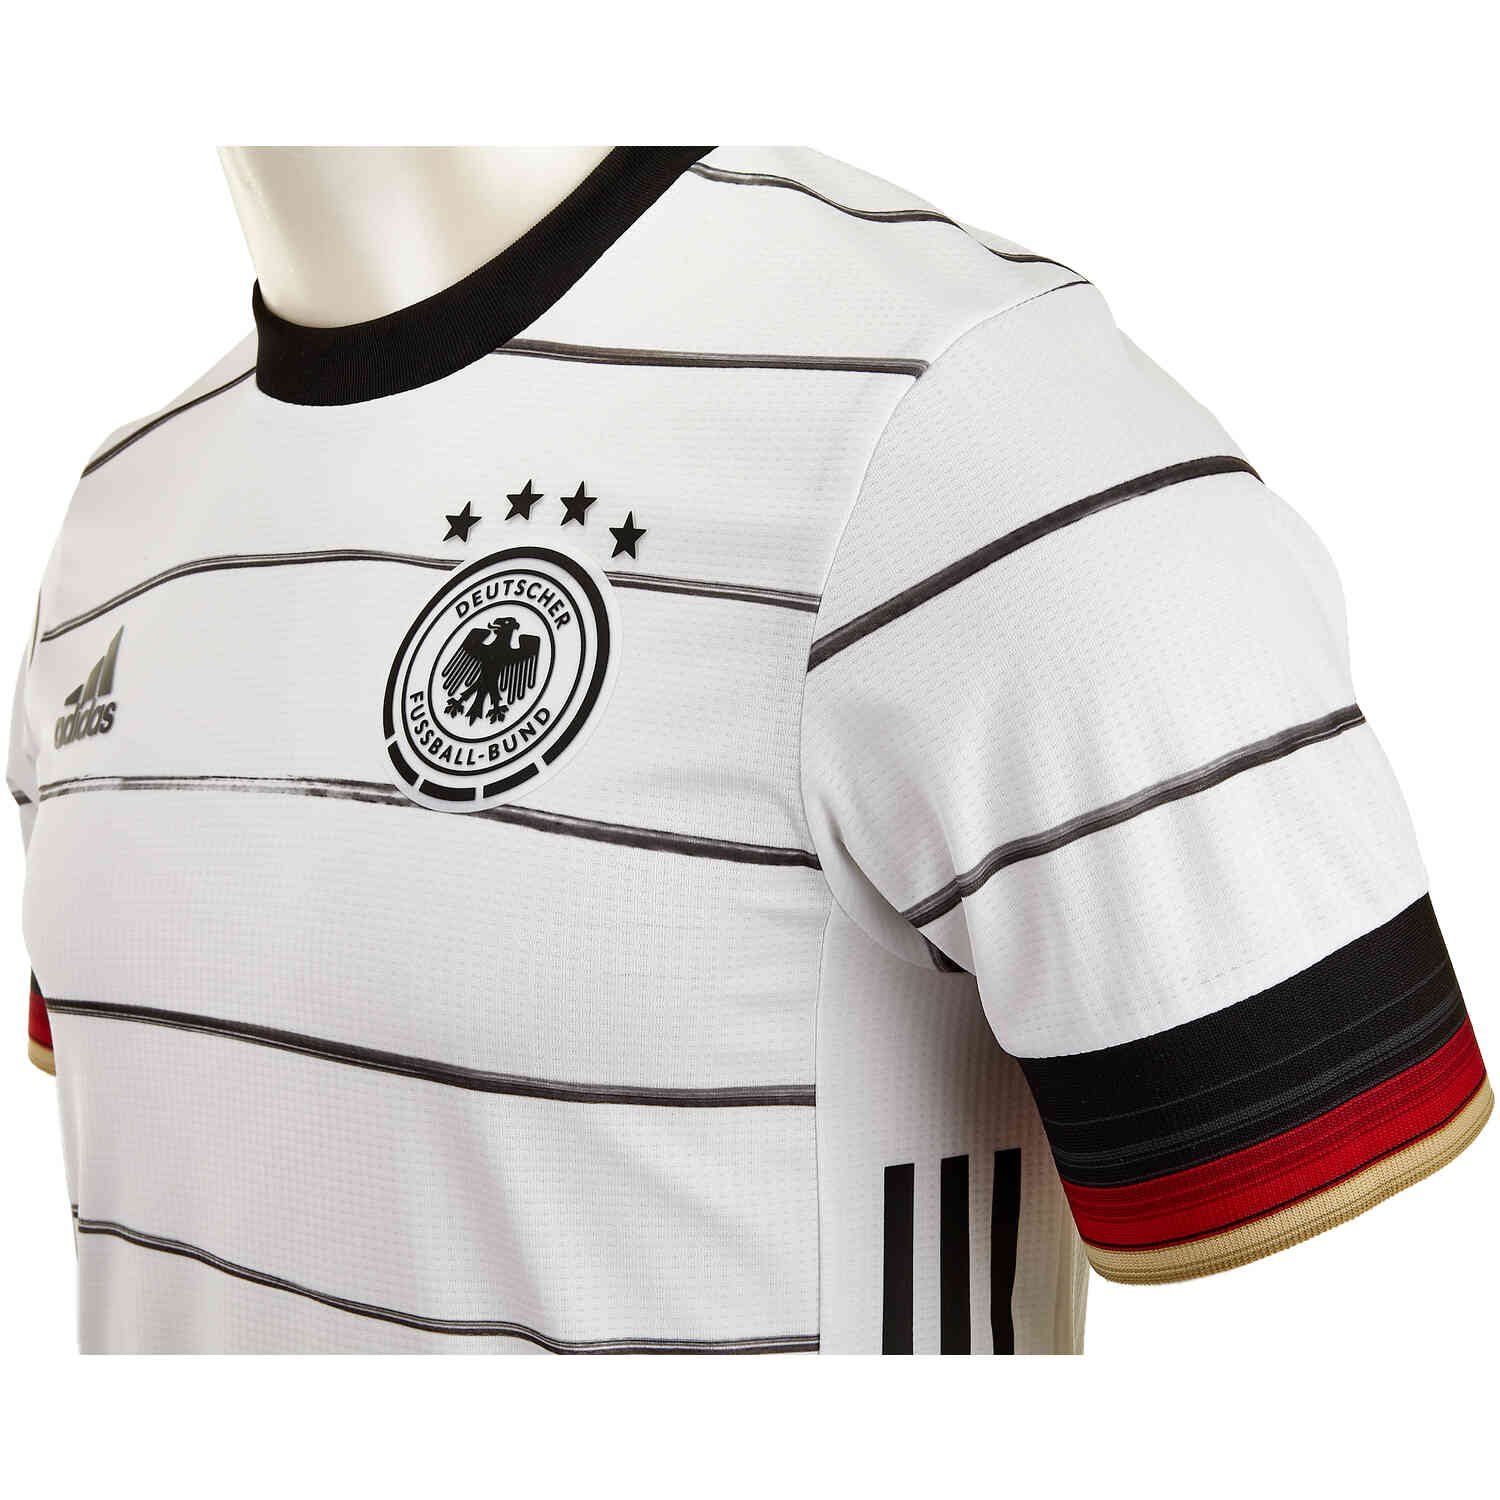 2020 adidas Germany Home Authentic Jersey - SoccerPro